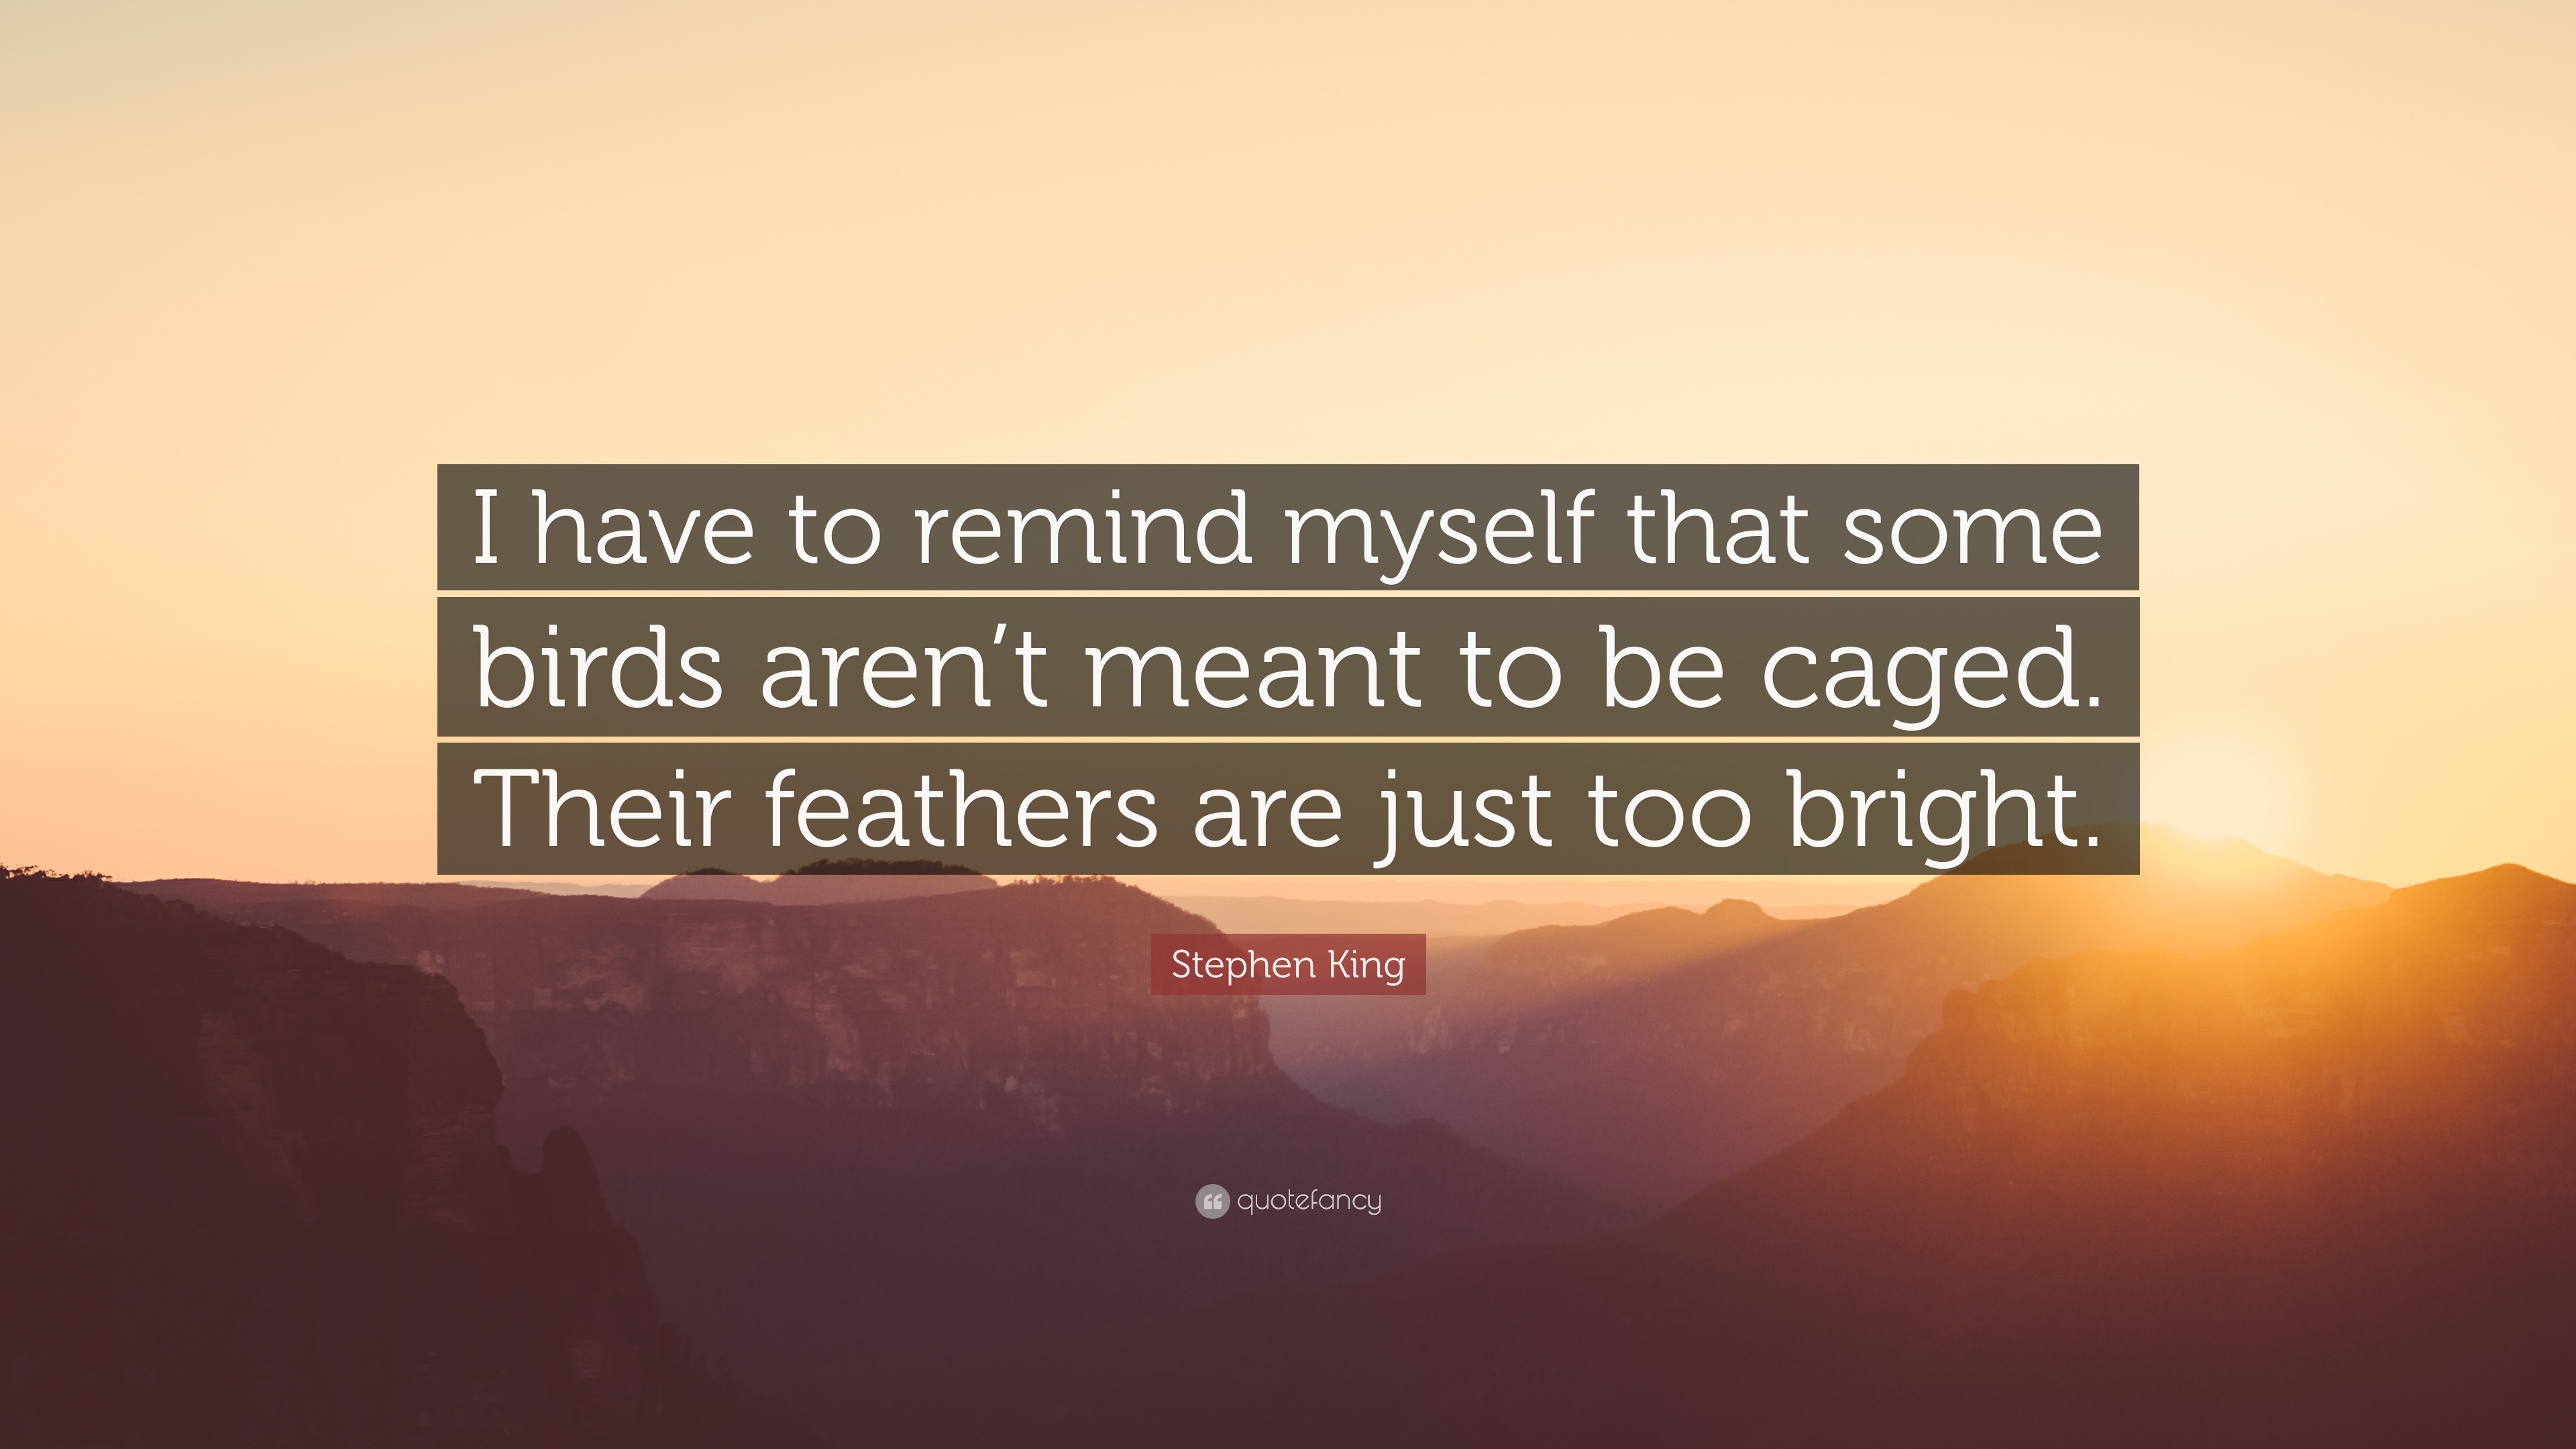 Stephen King Quote: “I have to remind myself that some birds aren’t